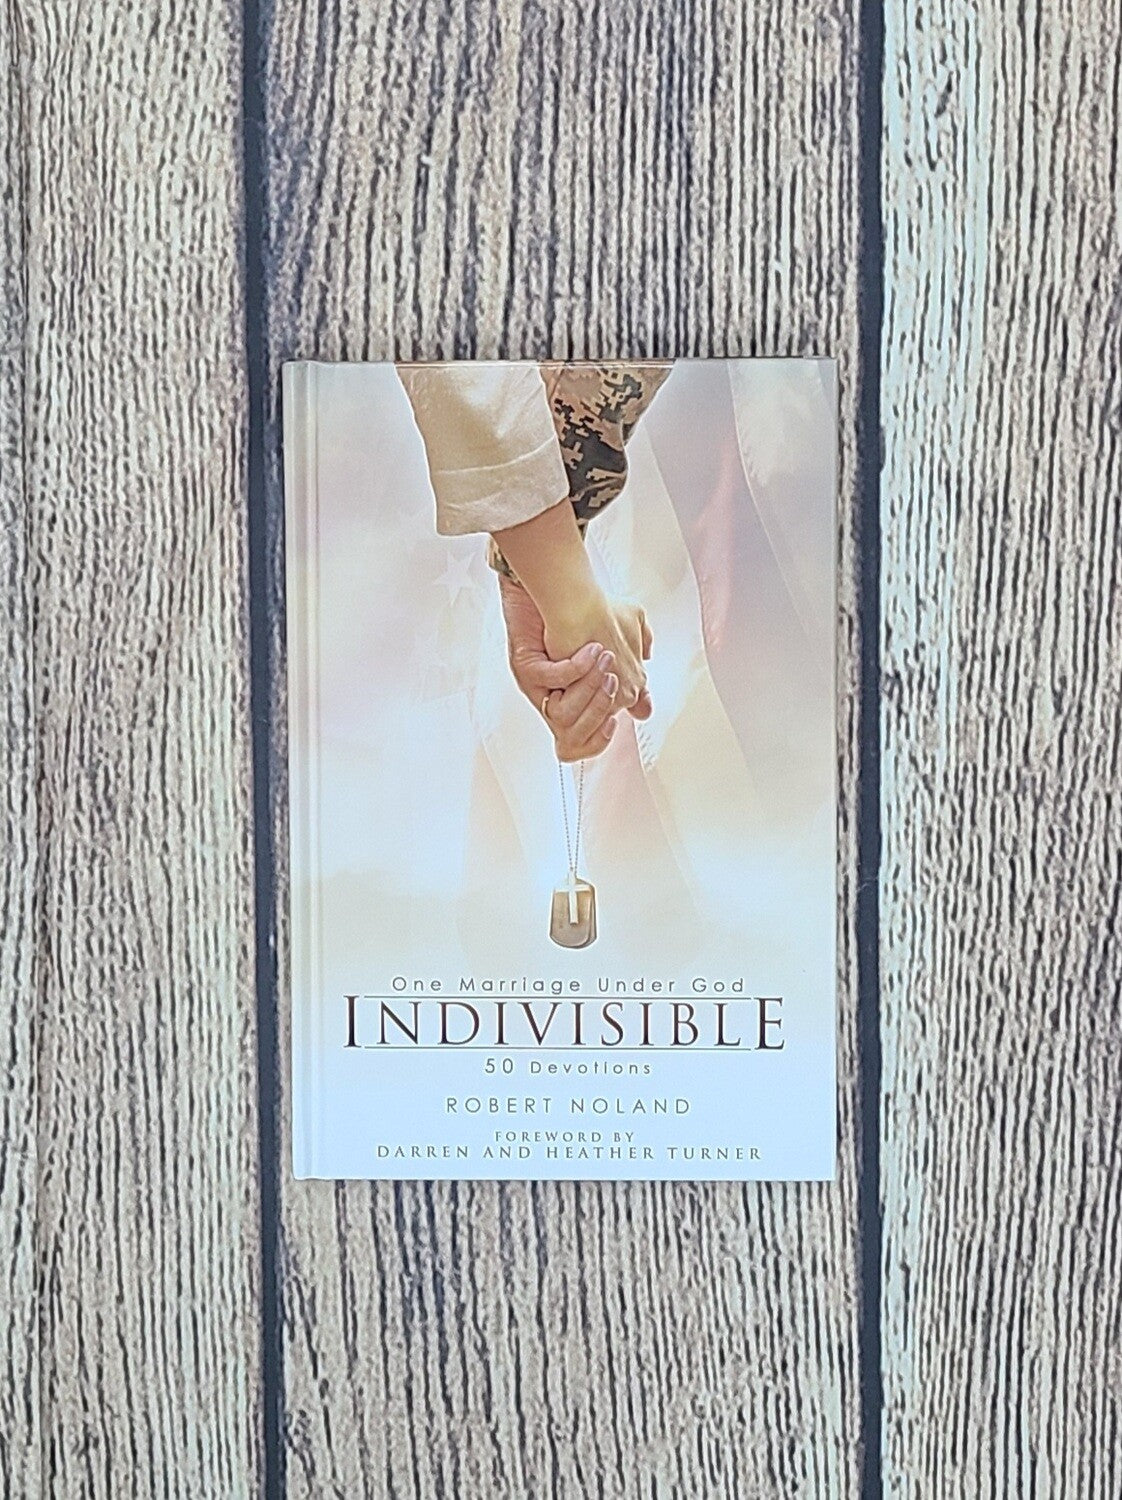 Indivisible - One Marriage Under God - 50 Devotions (H/B)